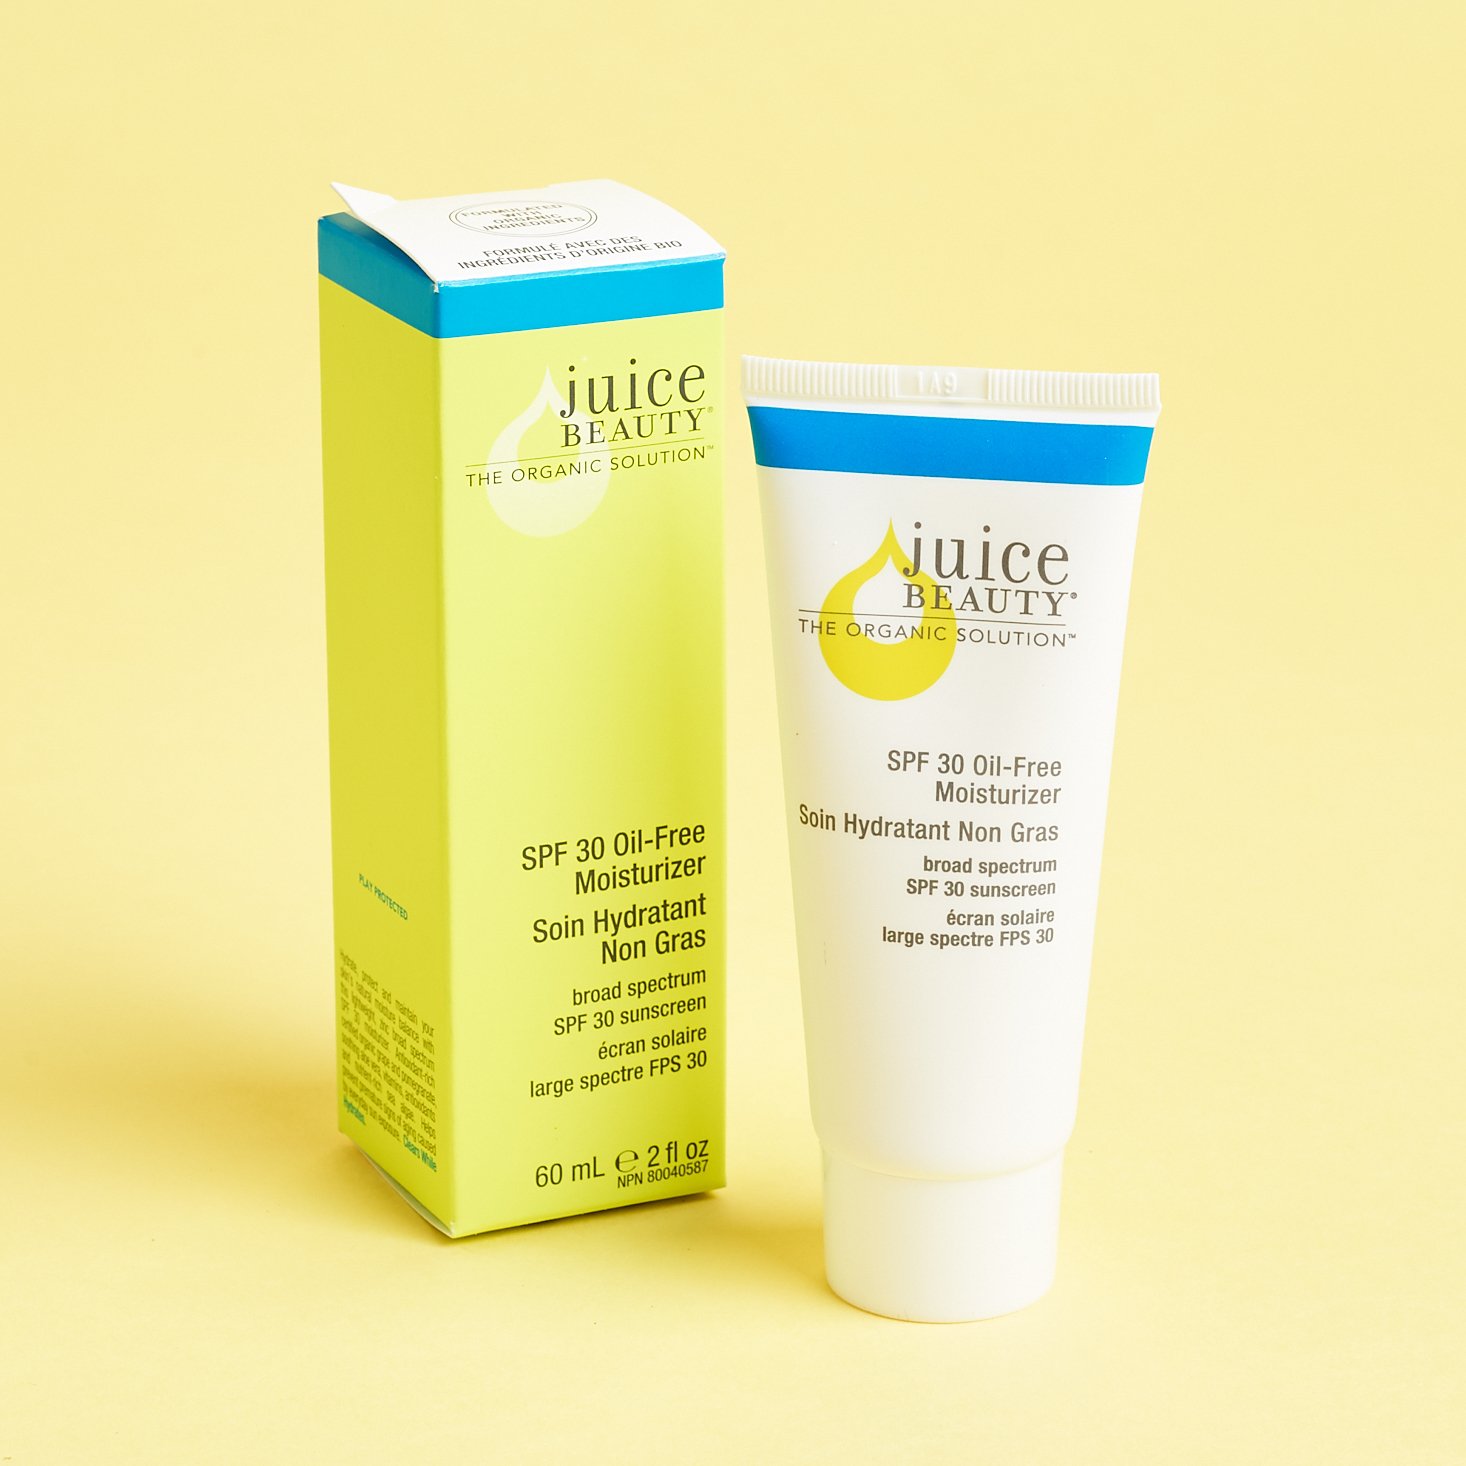 tube of juice moisturizer with blue and green graphics on white background